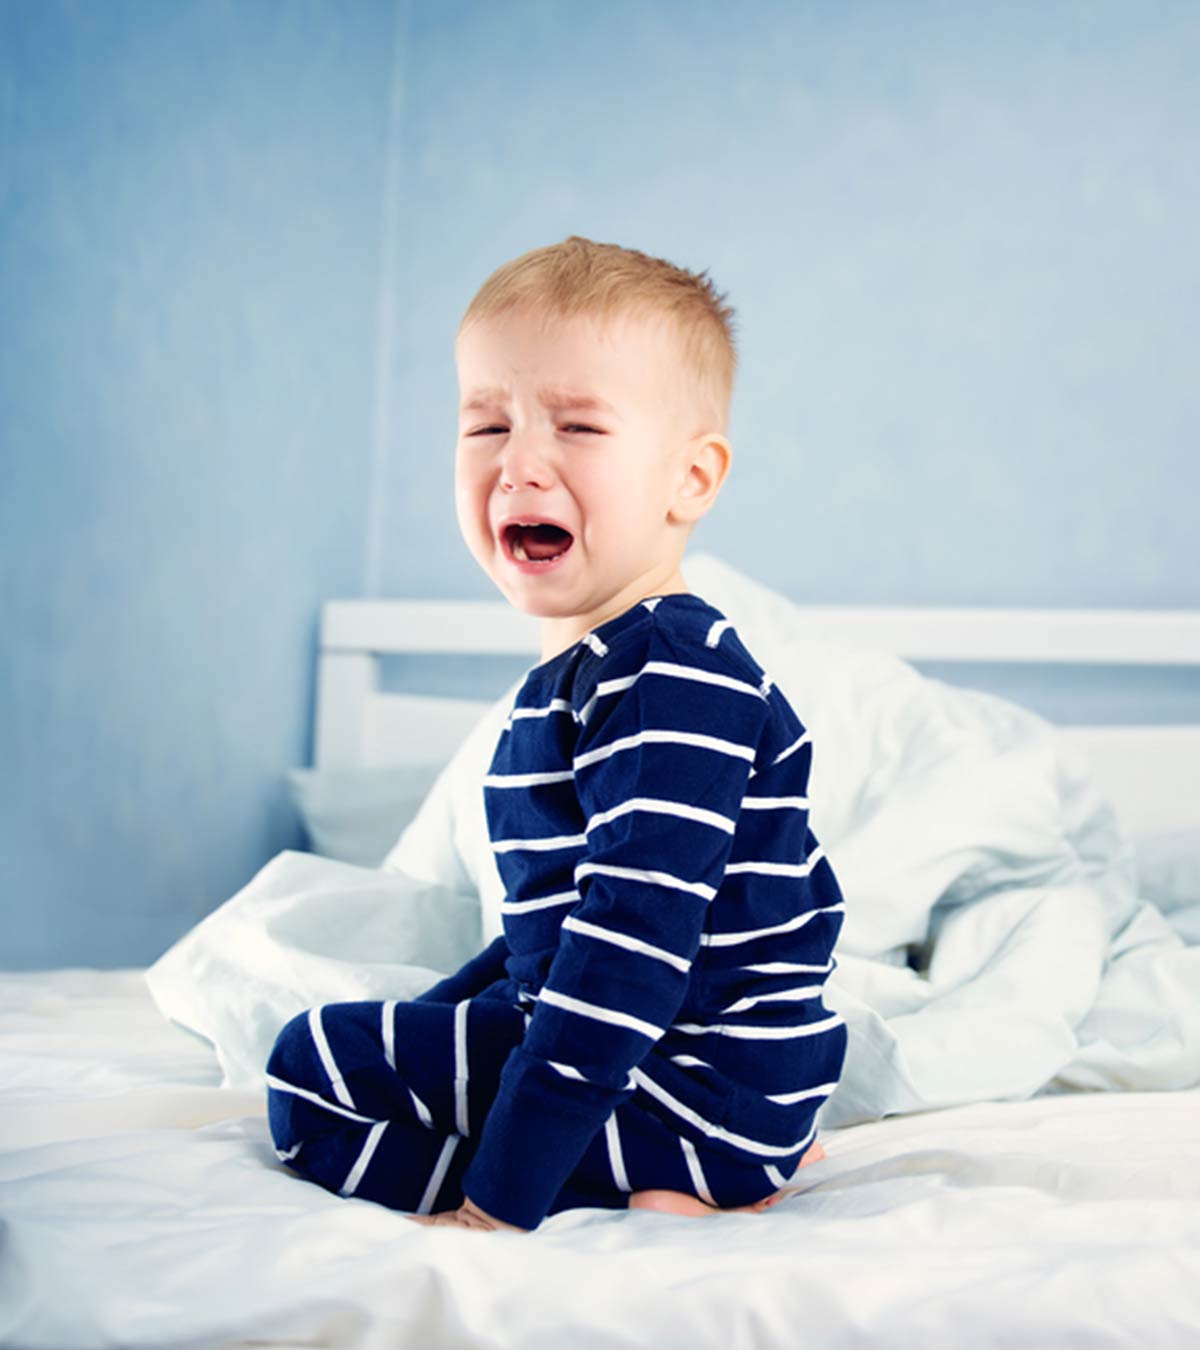 6 Common Reasons For A Toddler Waking Up In The Night